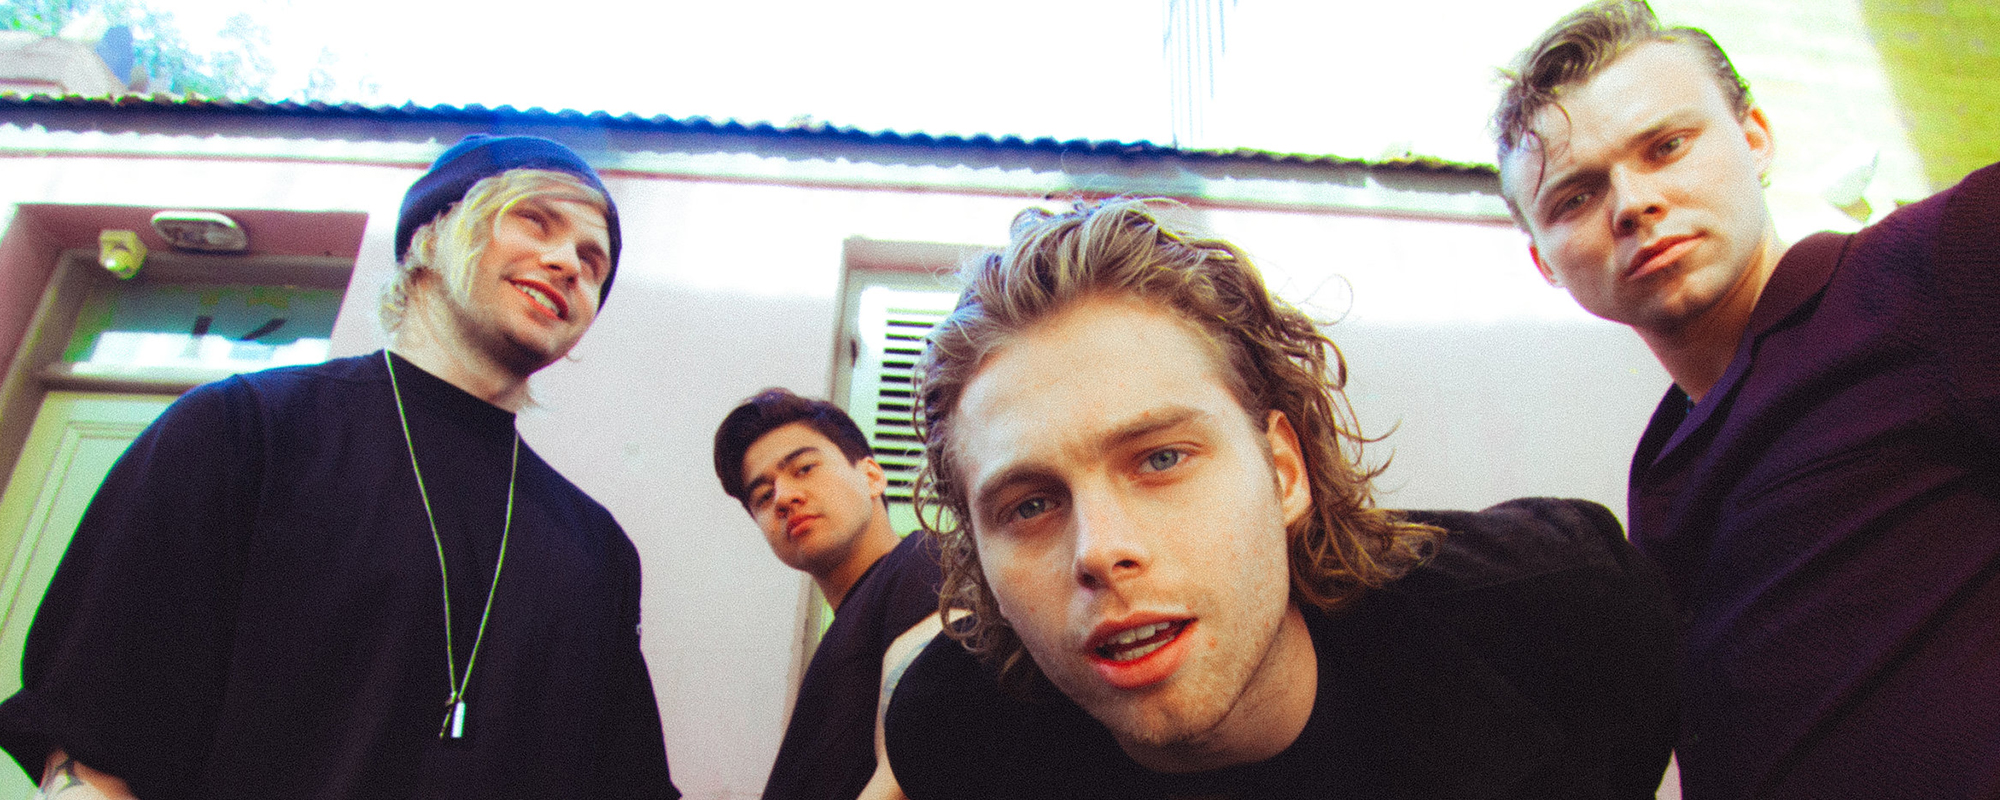 5 Seconds of Summer Drops Latest Single, “Me Myself & I,” Shares Fifth Album Name